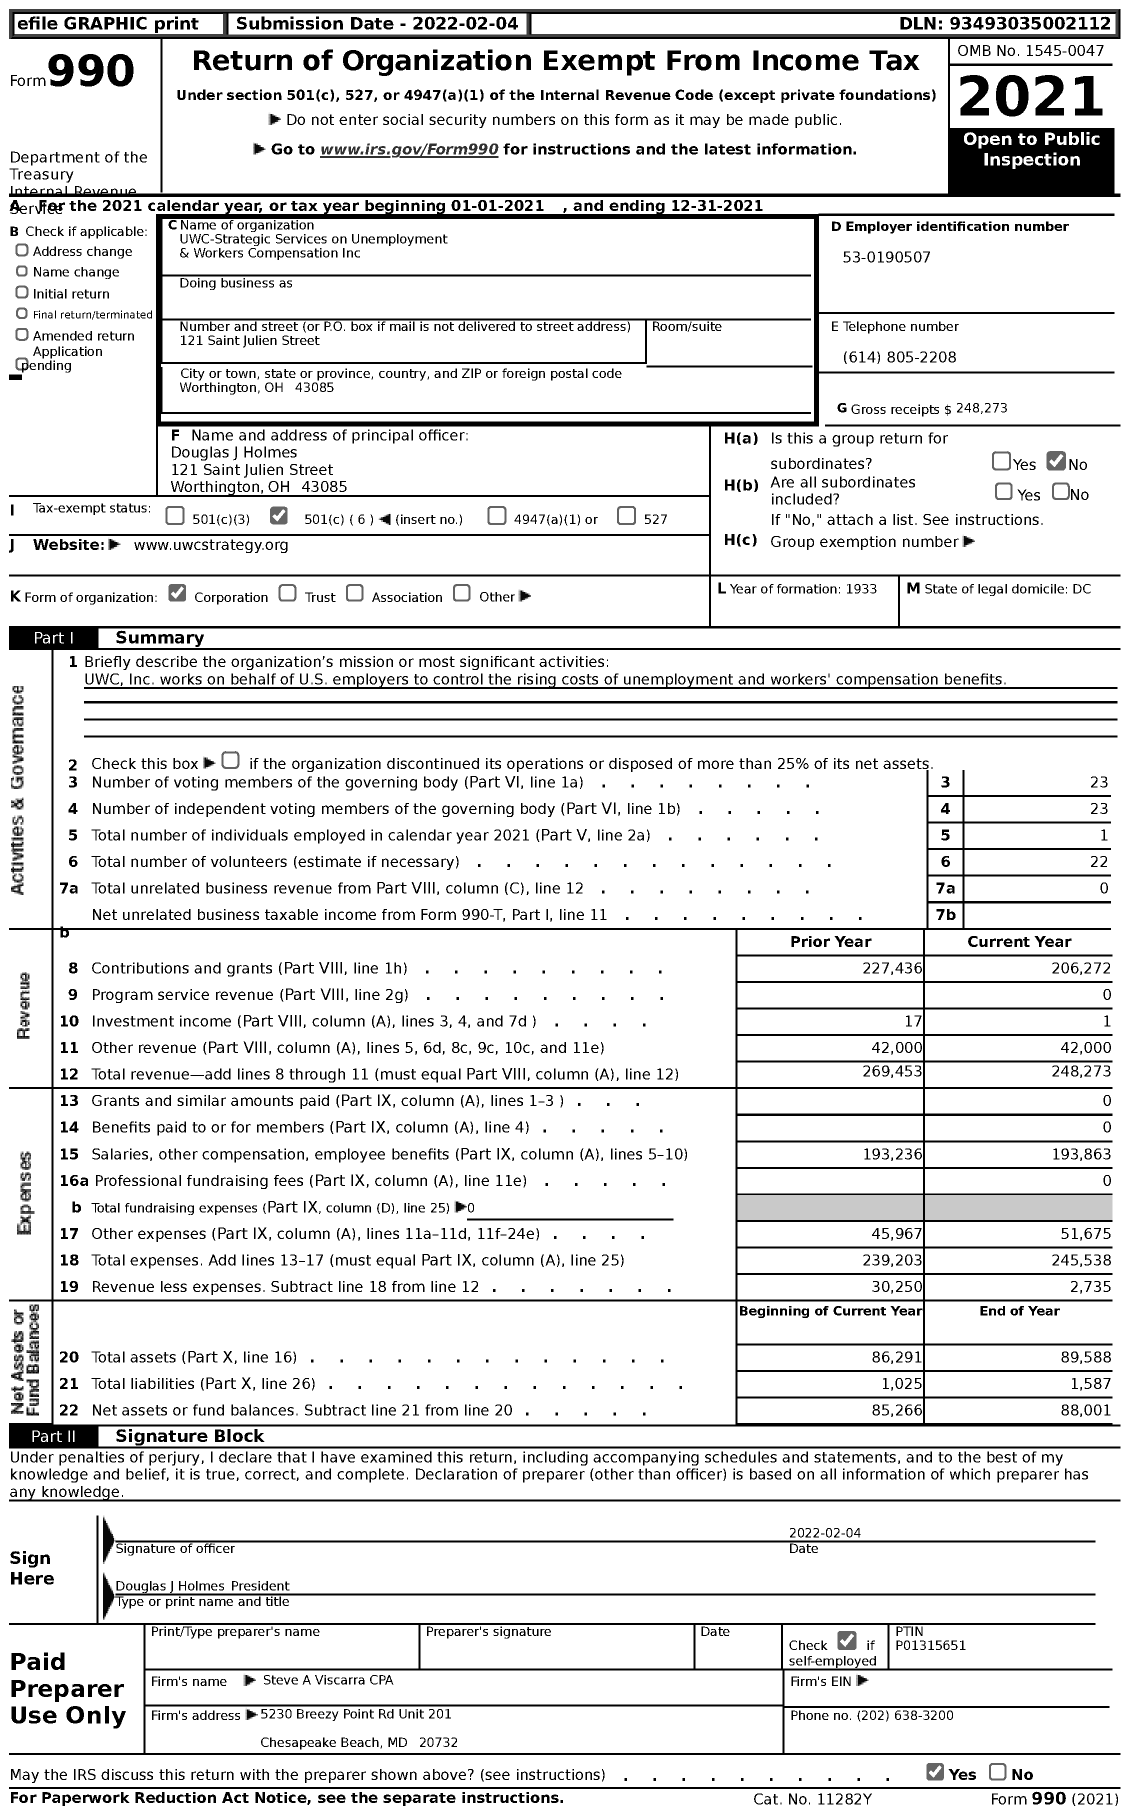 Image of first page of 2021 Form 990 for UWC-Strategic Services on Unemployment and Workers Compensation